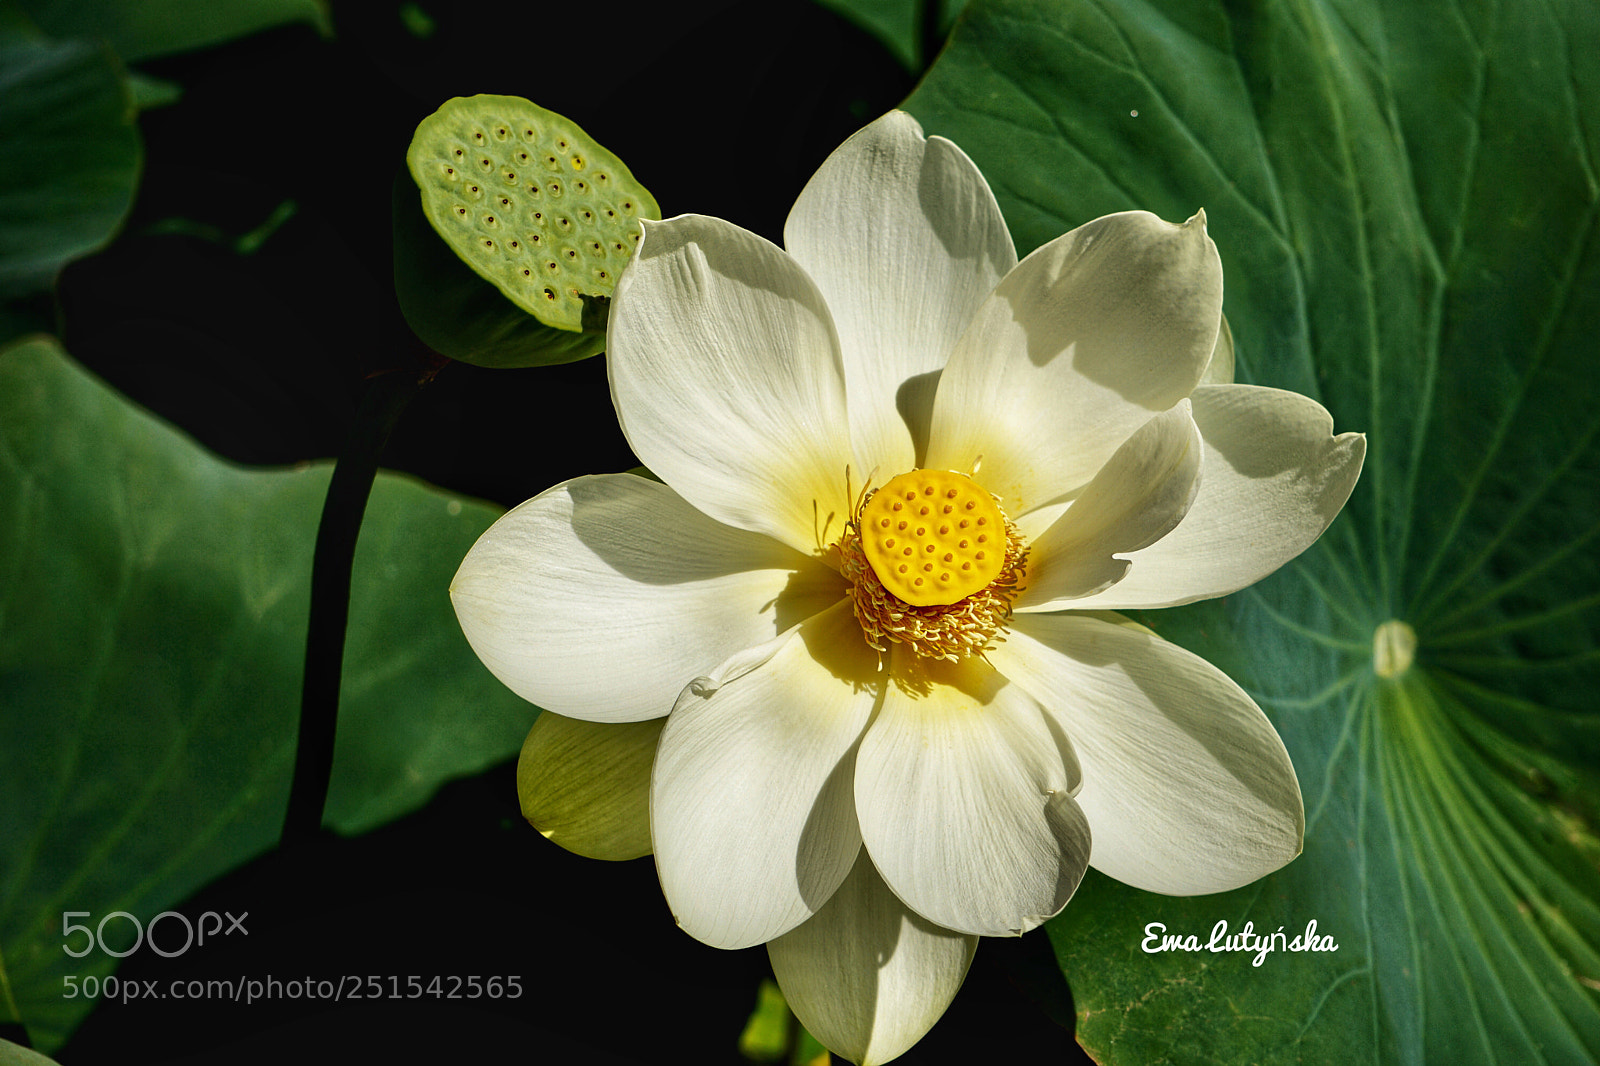 Sony a6000 sample photo. Lotus flowers - symbol photography